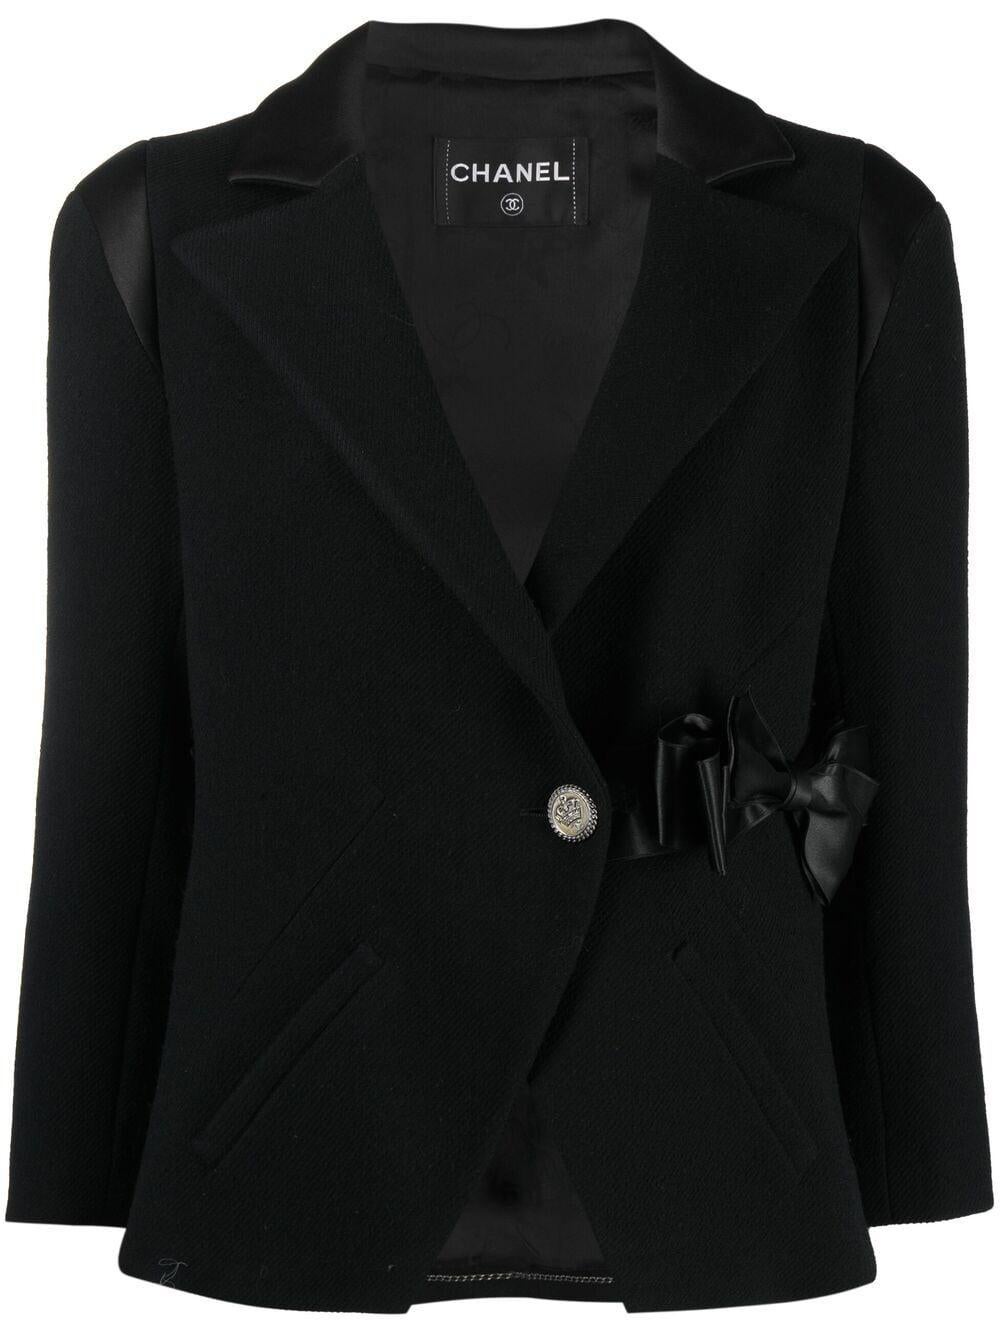 Chanel black boucle wool tweed jacket featuring a waist silk satin bow detail, a front fancy logo button, a logo silk lining, a silver tone inside chain. 
Circa 2008s. 
Composition: Laine 96%, Nylon 4% Details 100% silk
Lining: 100% Silk 
Estimated